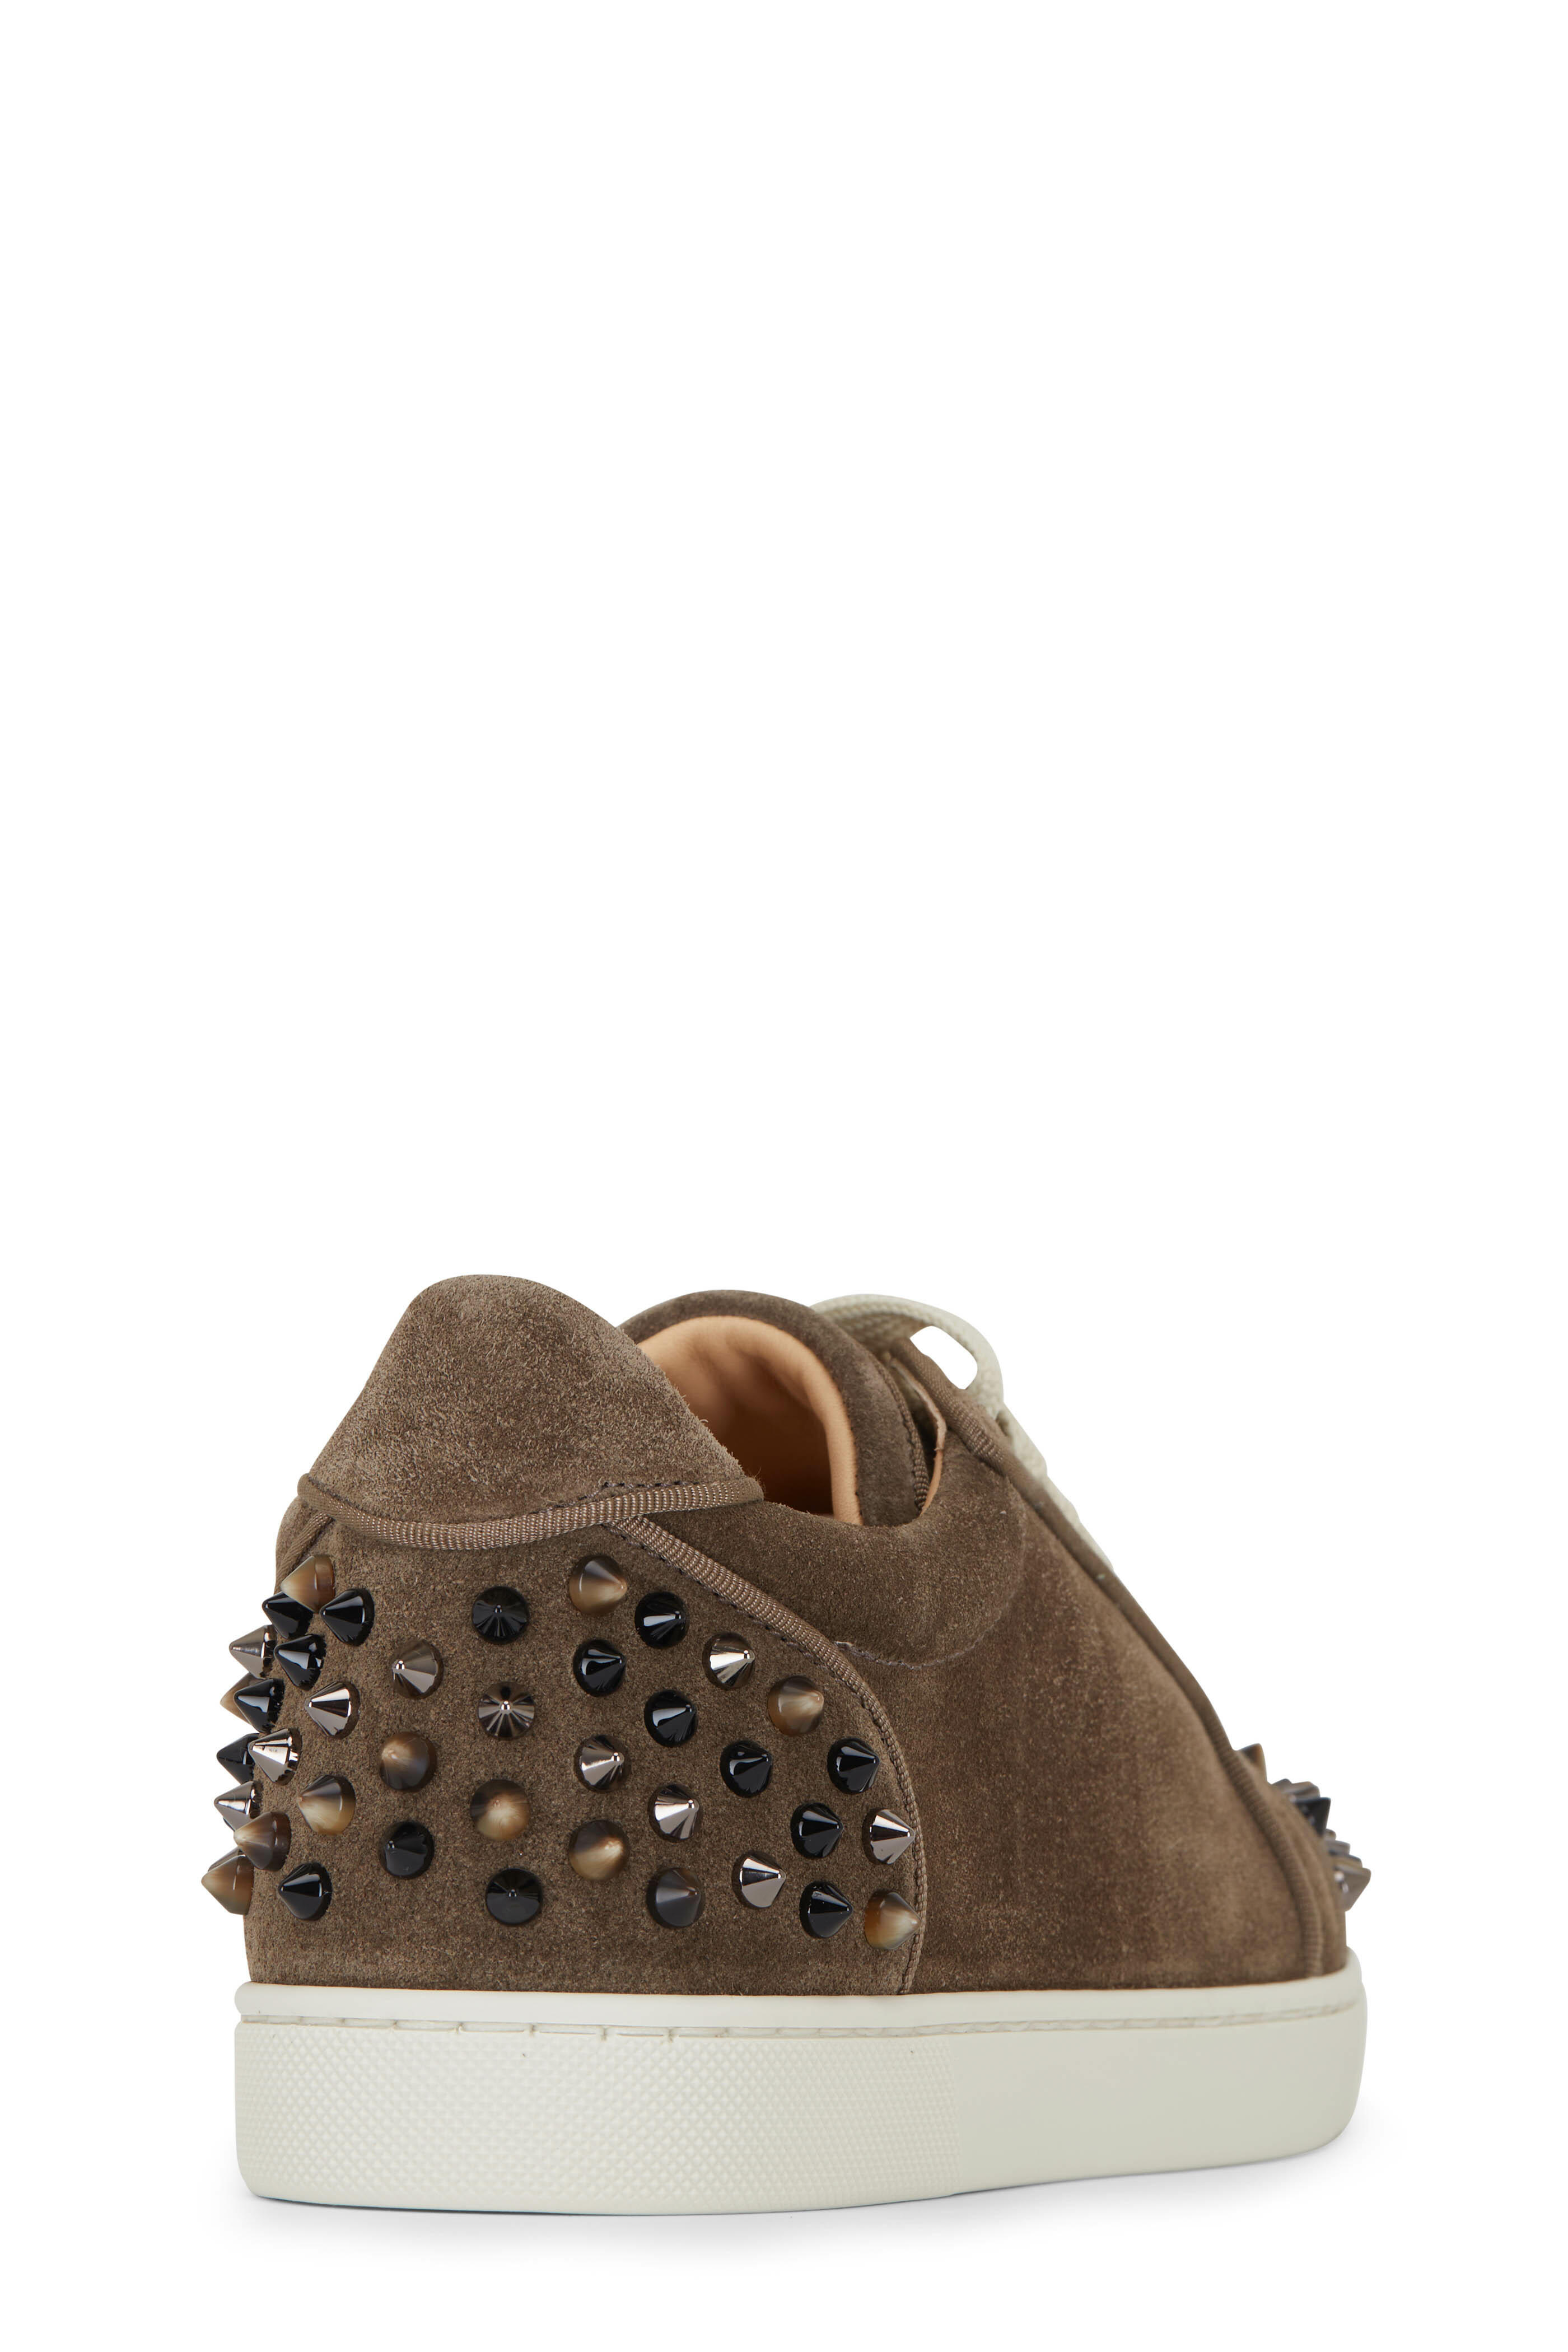 Christian Louboutin 2 Orlato Brown Suede Spiked Sneakers